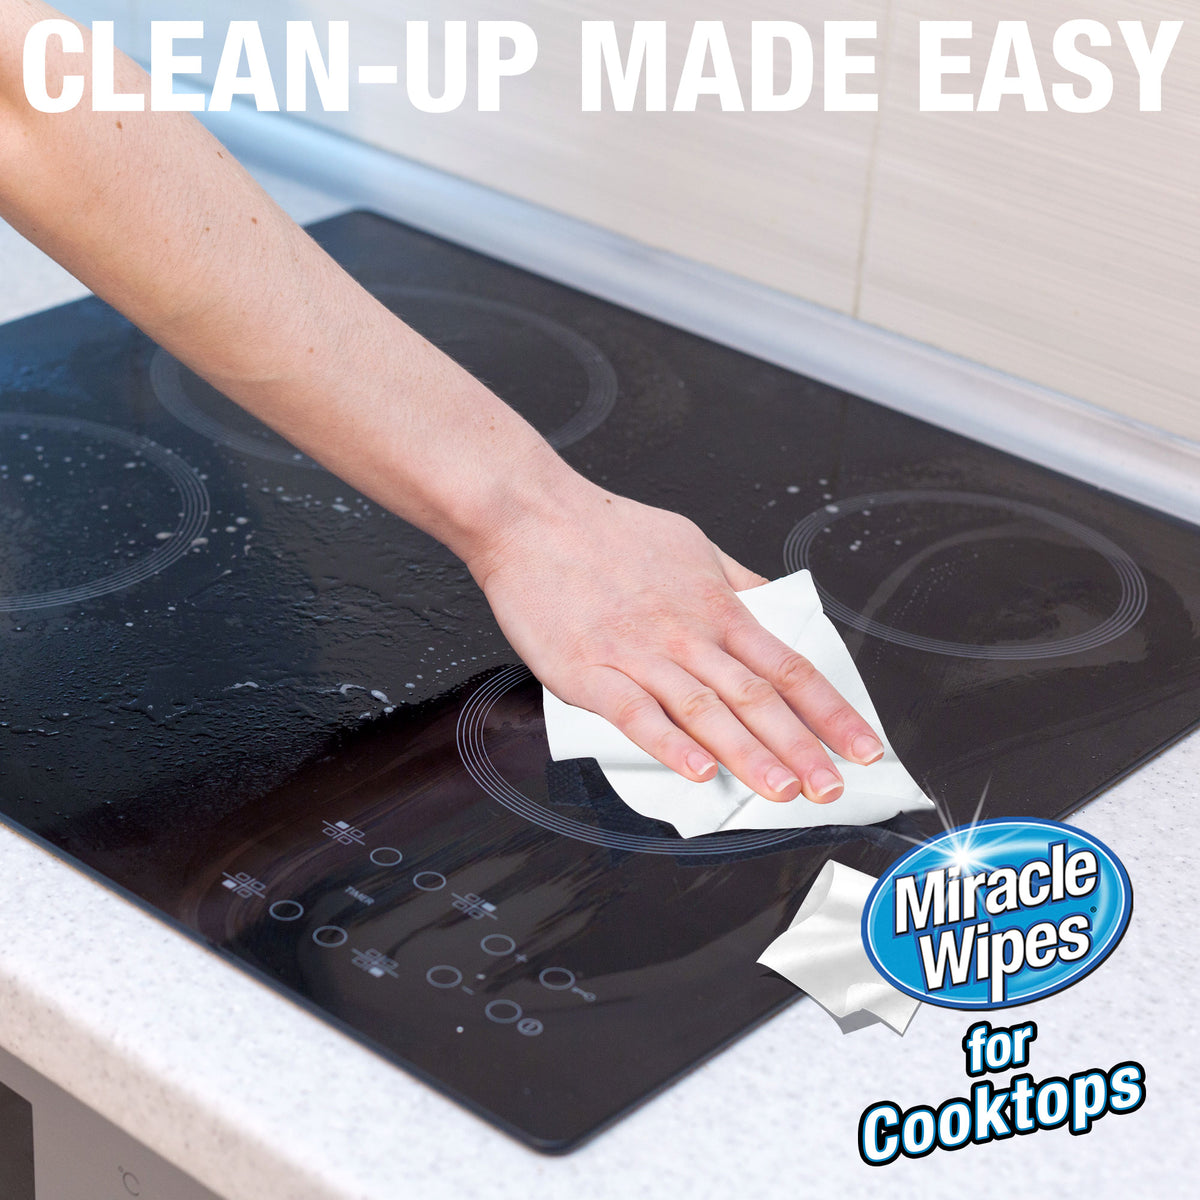 Lookon Heavy Duty Cleaning Wipes All Purpose Cleaner Kitchens Bathrooms  Countertops microwaves and Cooktops Removes Grime Buildu